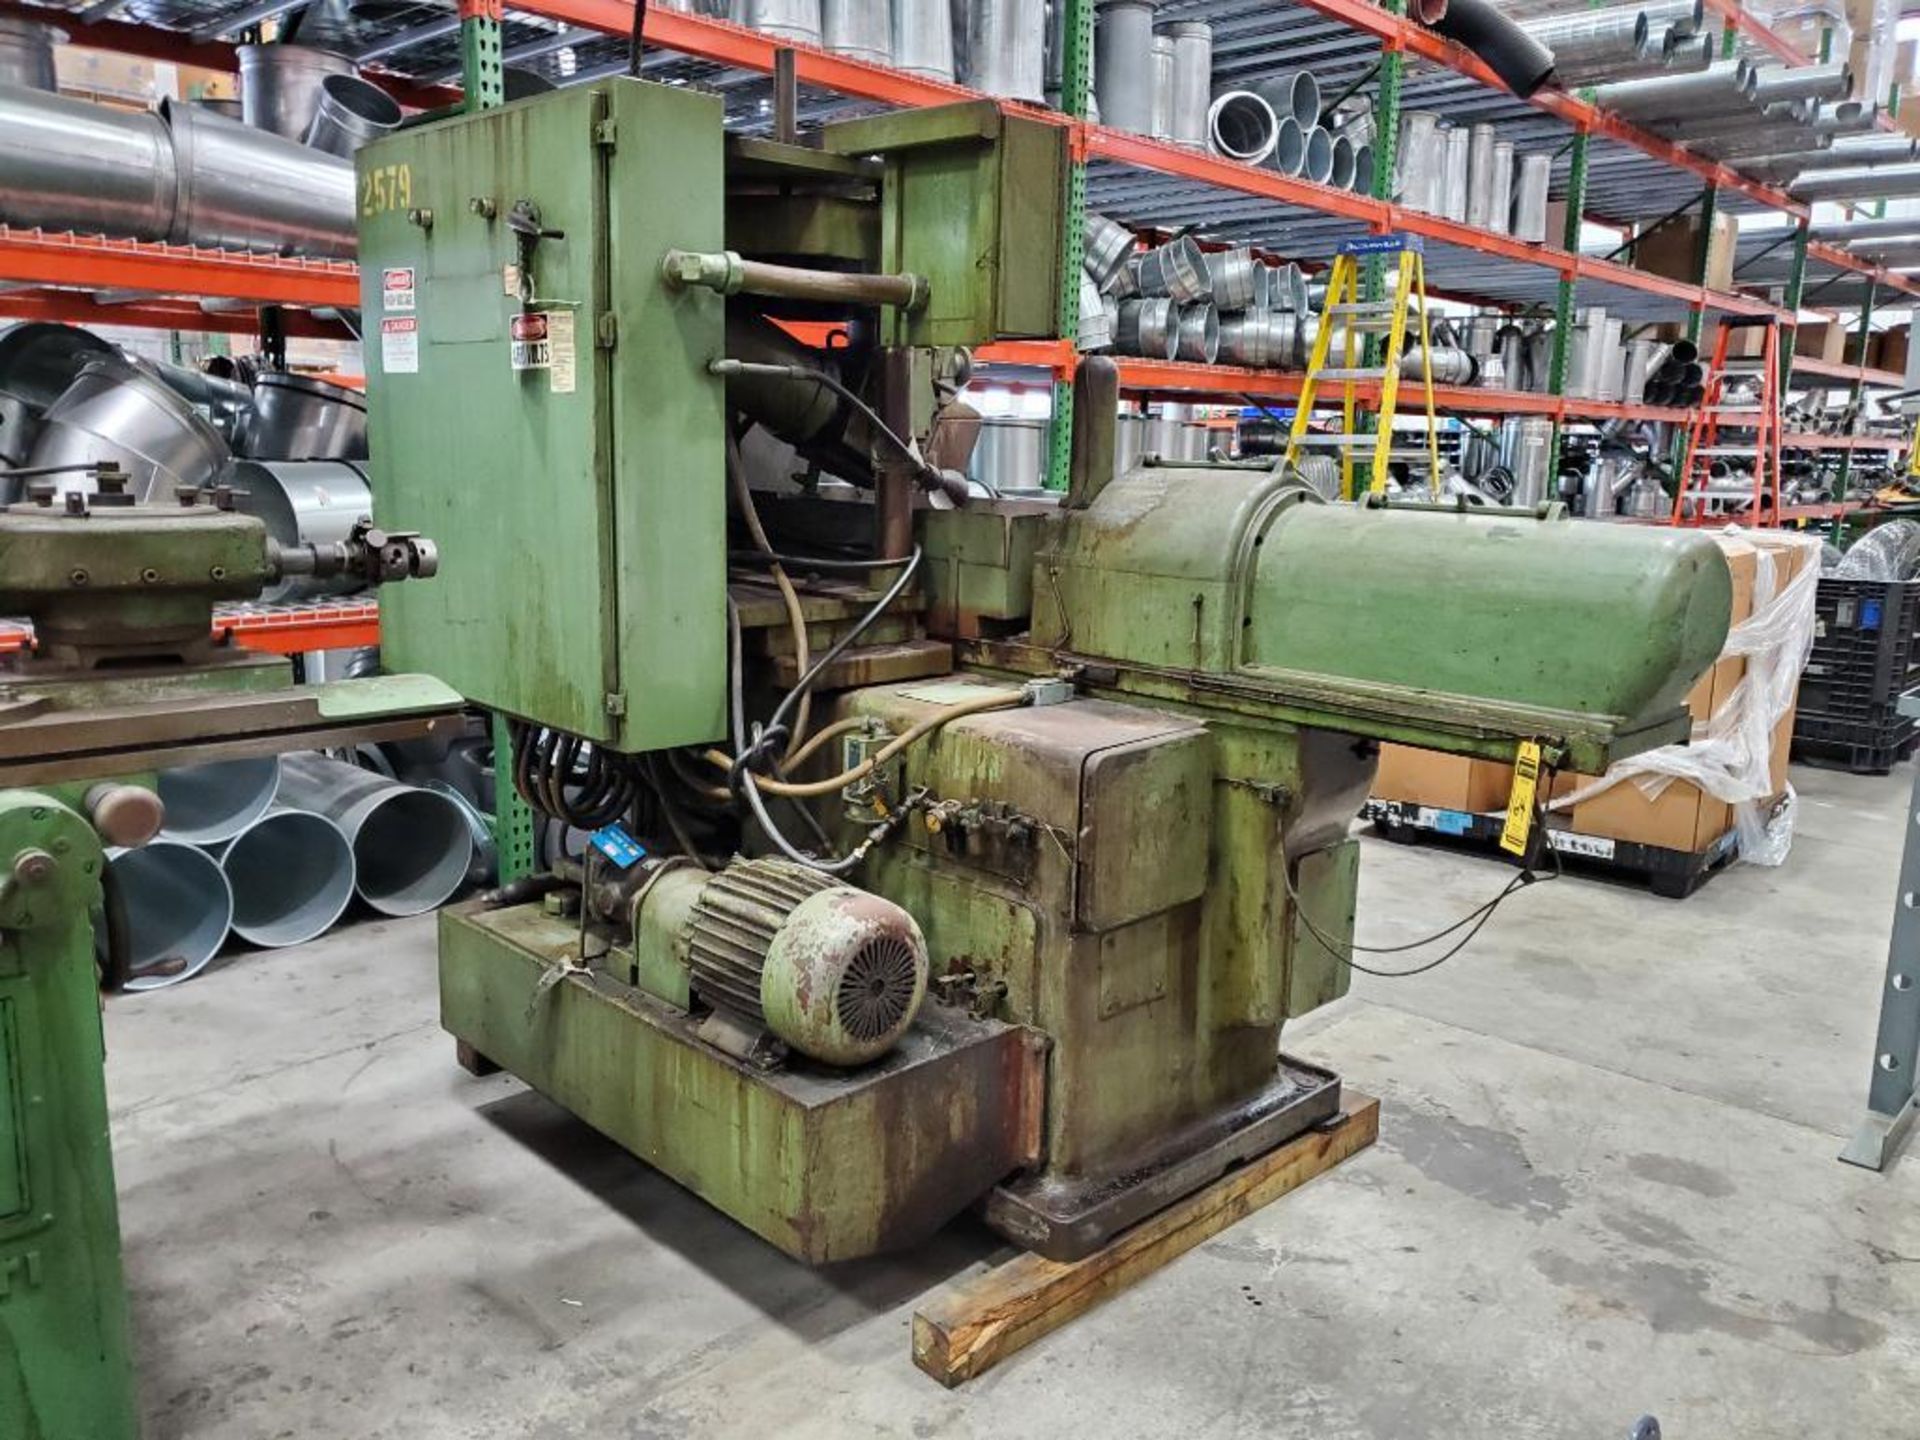 Star-Cutter Hydraulic OD Grinder/Dresser, Model 11X16, S/N B-0002-71, Manual/ Continuous Operation - Image 5 of 11